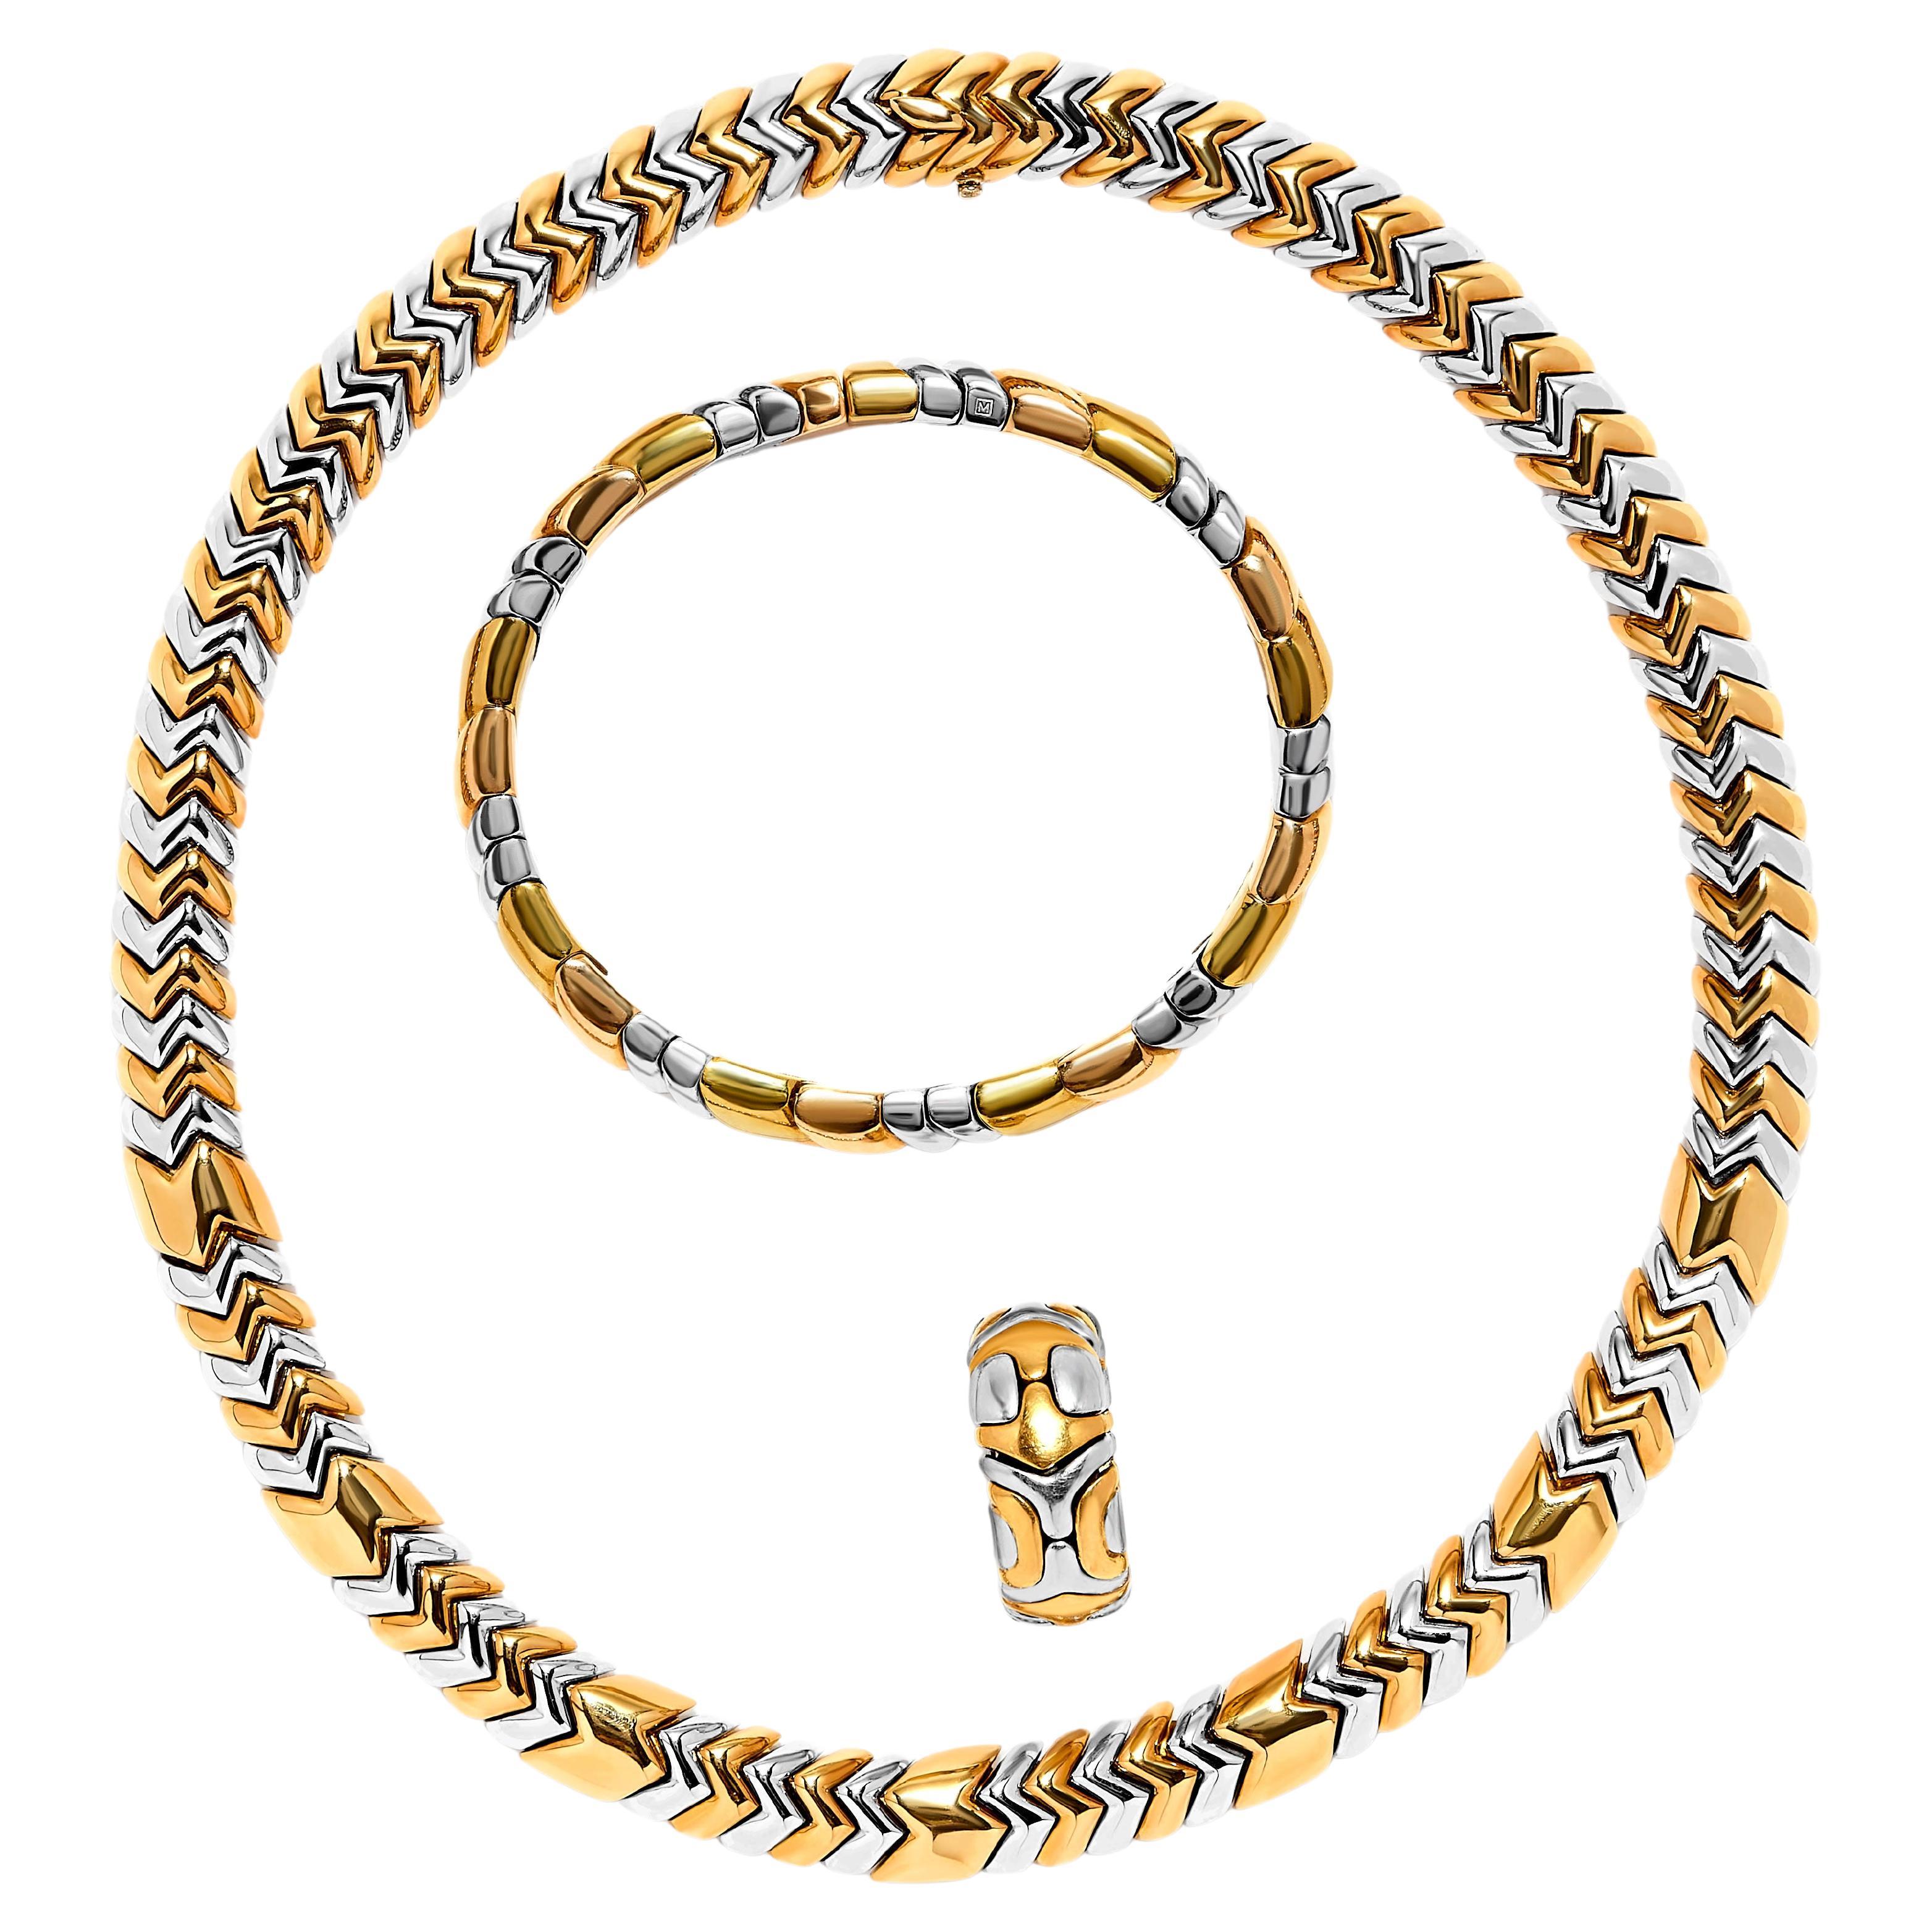 Introducing the exquisite Demiparure set from BVLGARI's iconic 